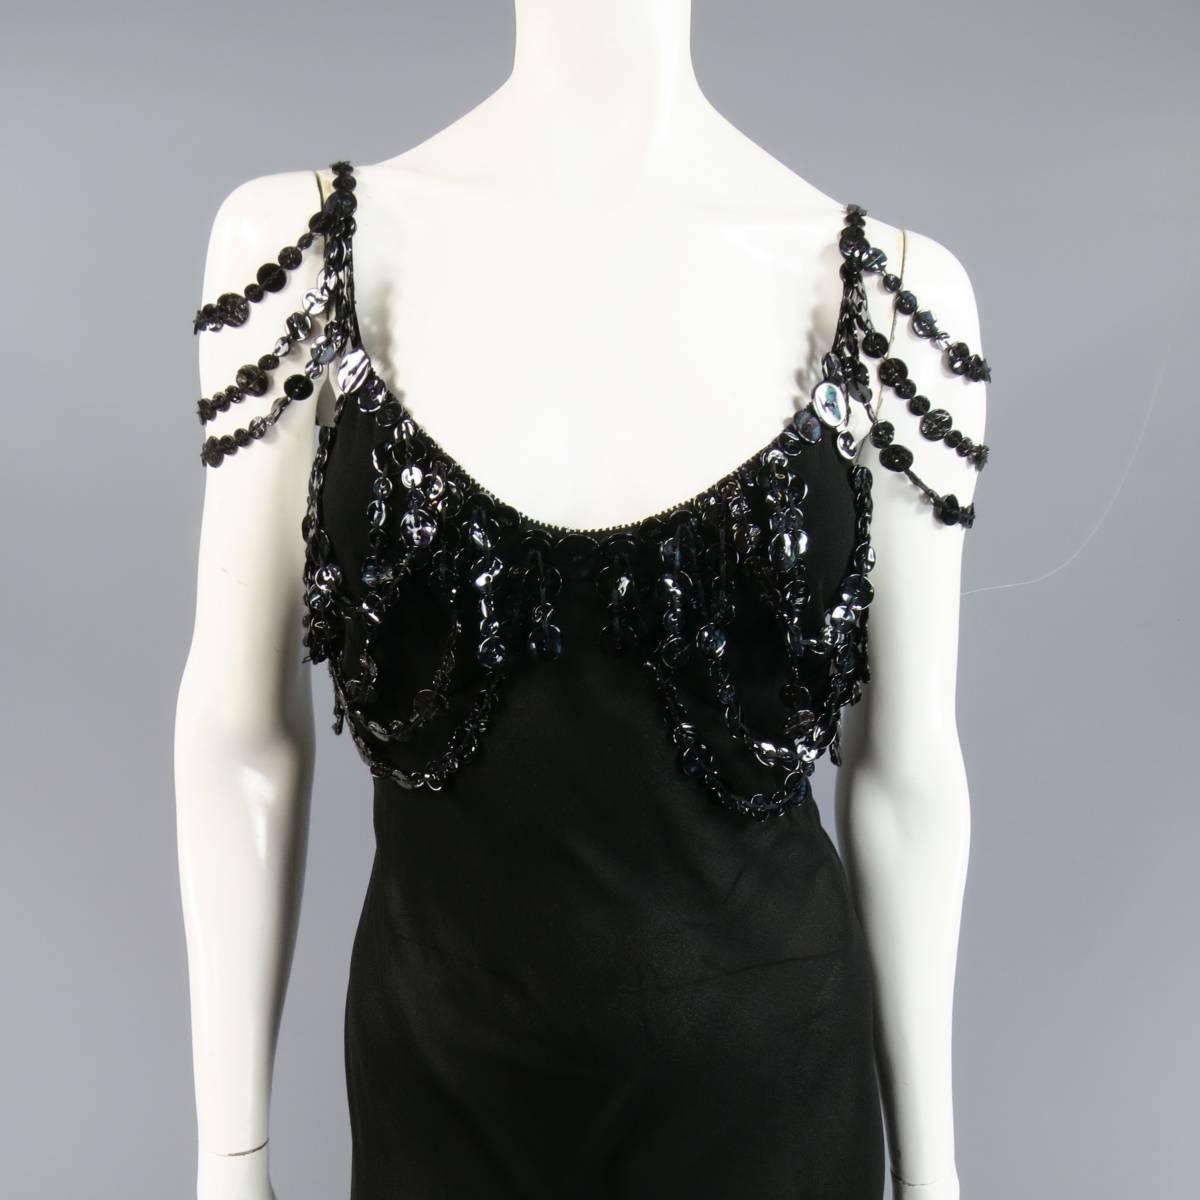 This stunning JEAN PAUL GAULTIER cocktail dress comes in a sheer black crepe and features a slip cut sheath style, tiered shoulder straps with oil slick black buttons, and layered button embellishments along the bust line. Made in Italy.
 
Good